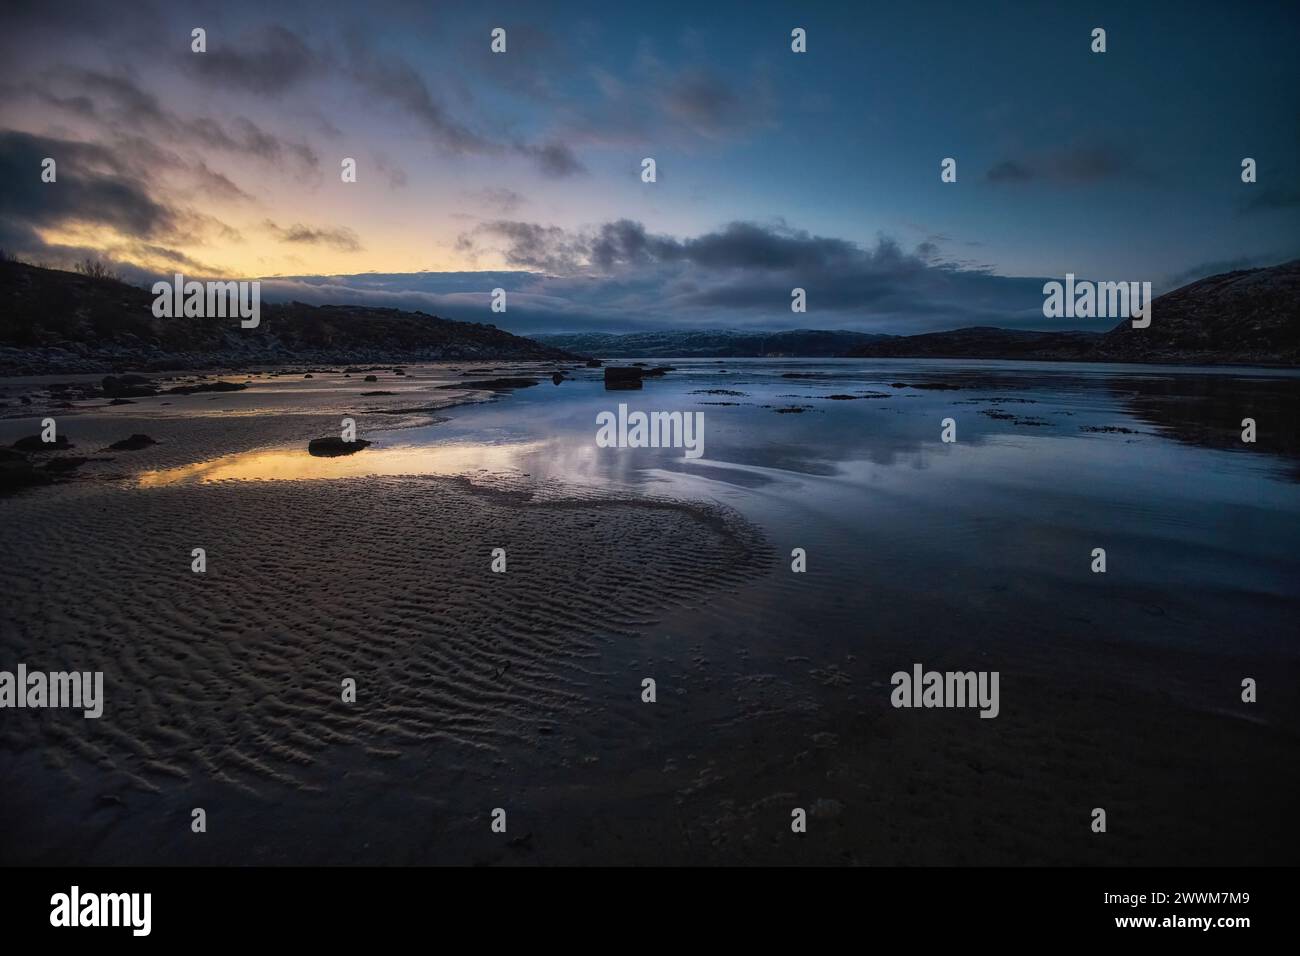 Twilight sky with clouds over a serene coastal setting, reflected in calm tidal pools Stock Photo